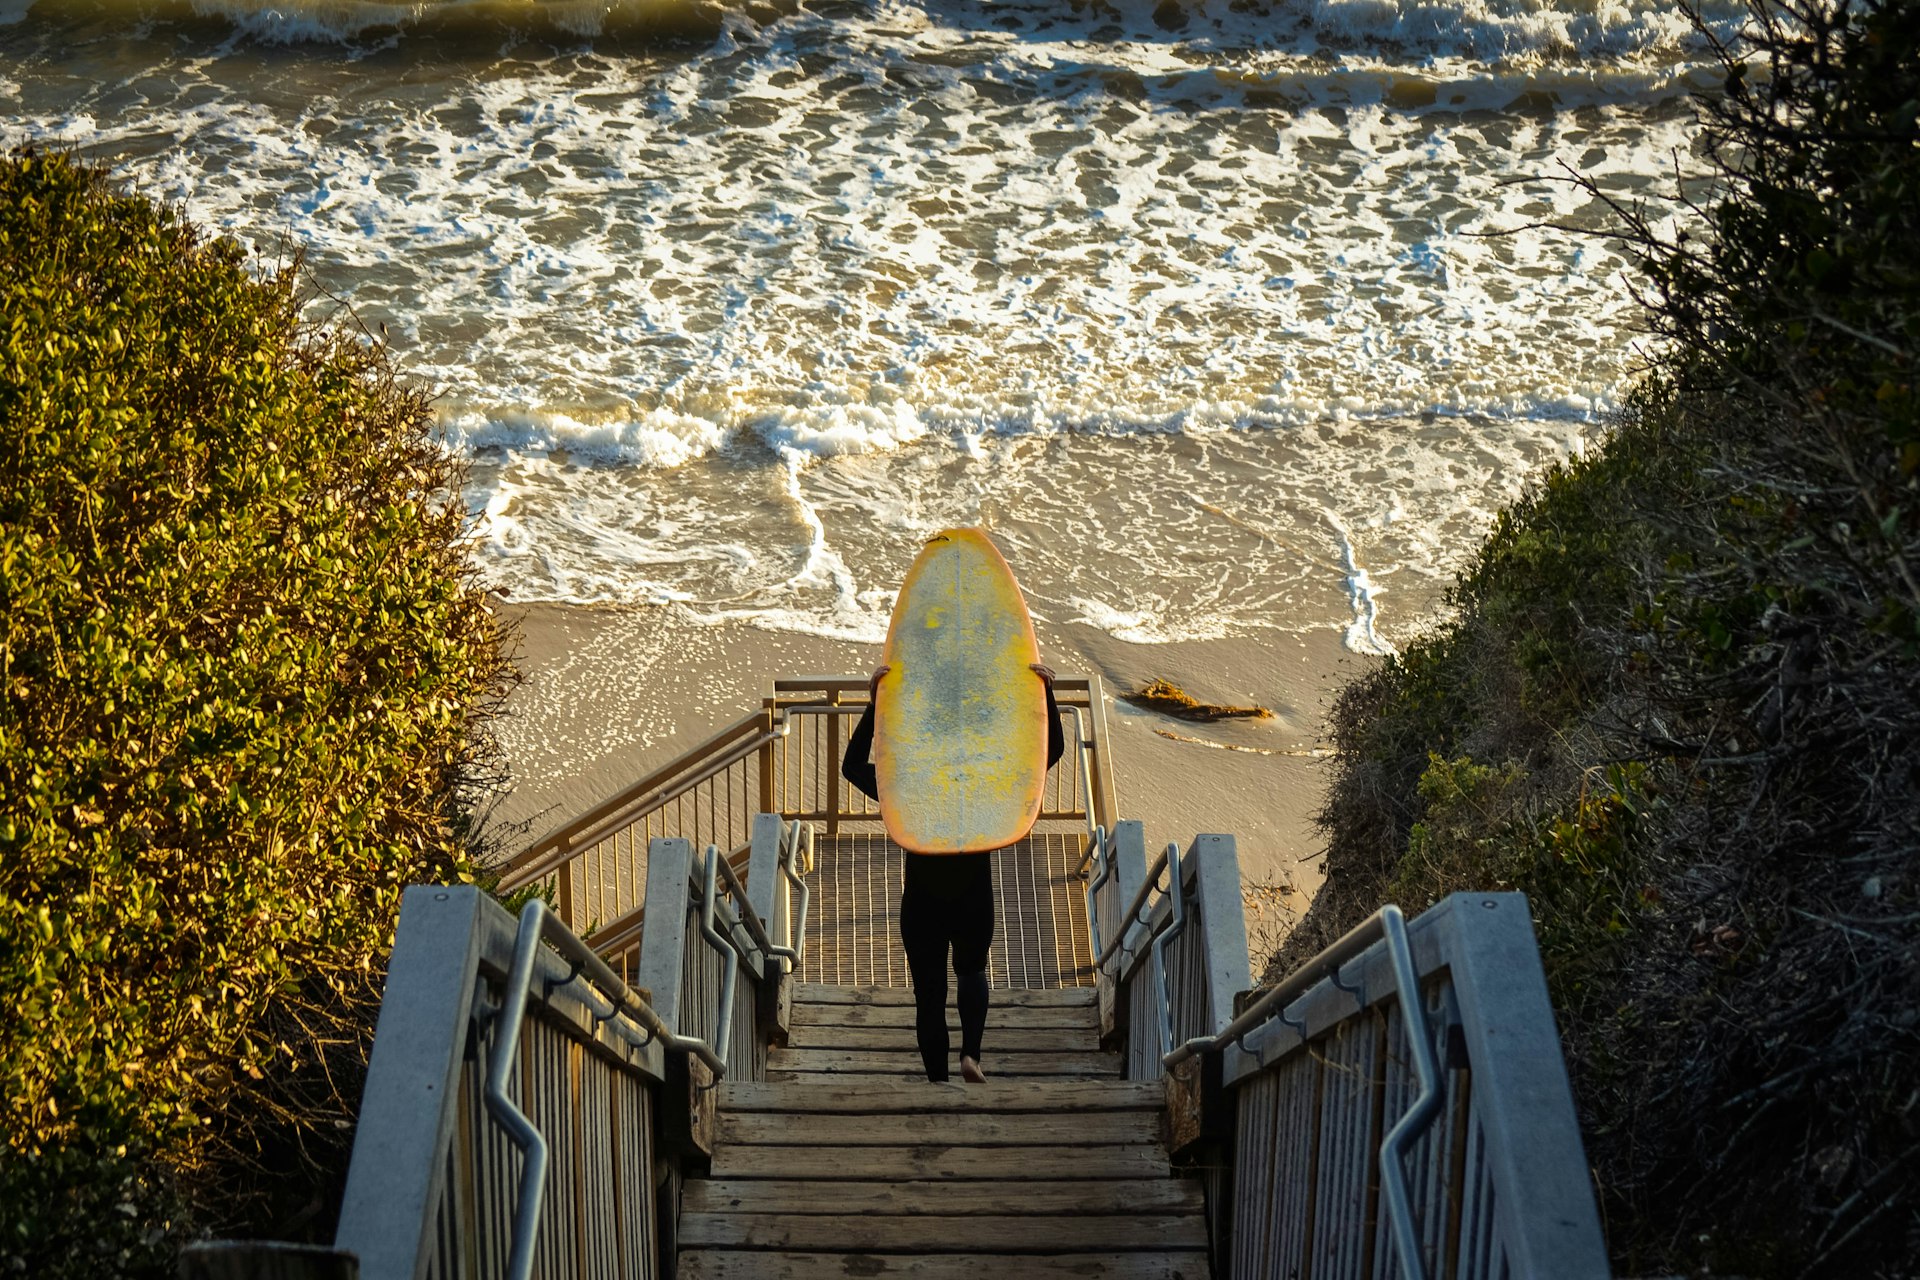 A shot of a surfer carrying a board down wooden steps to the ocean